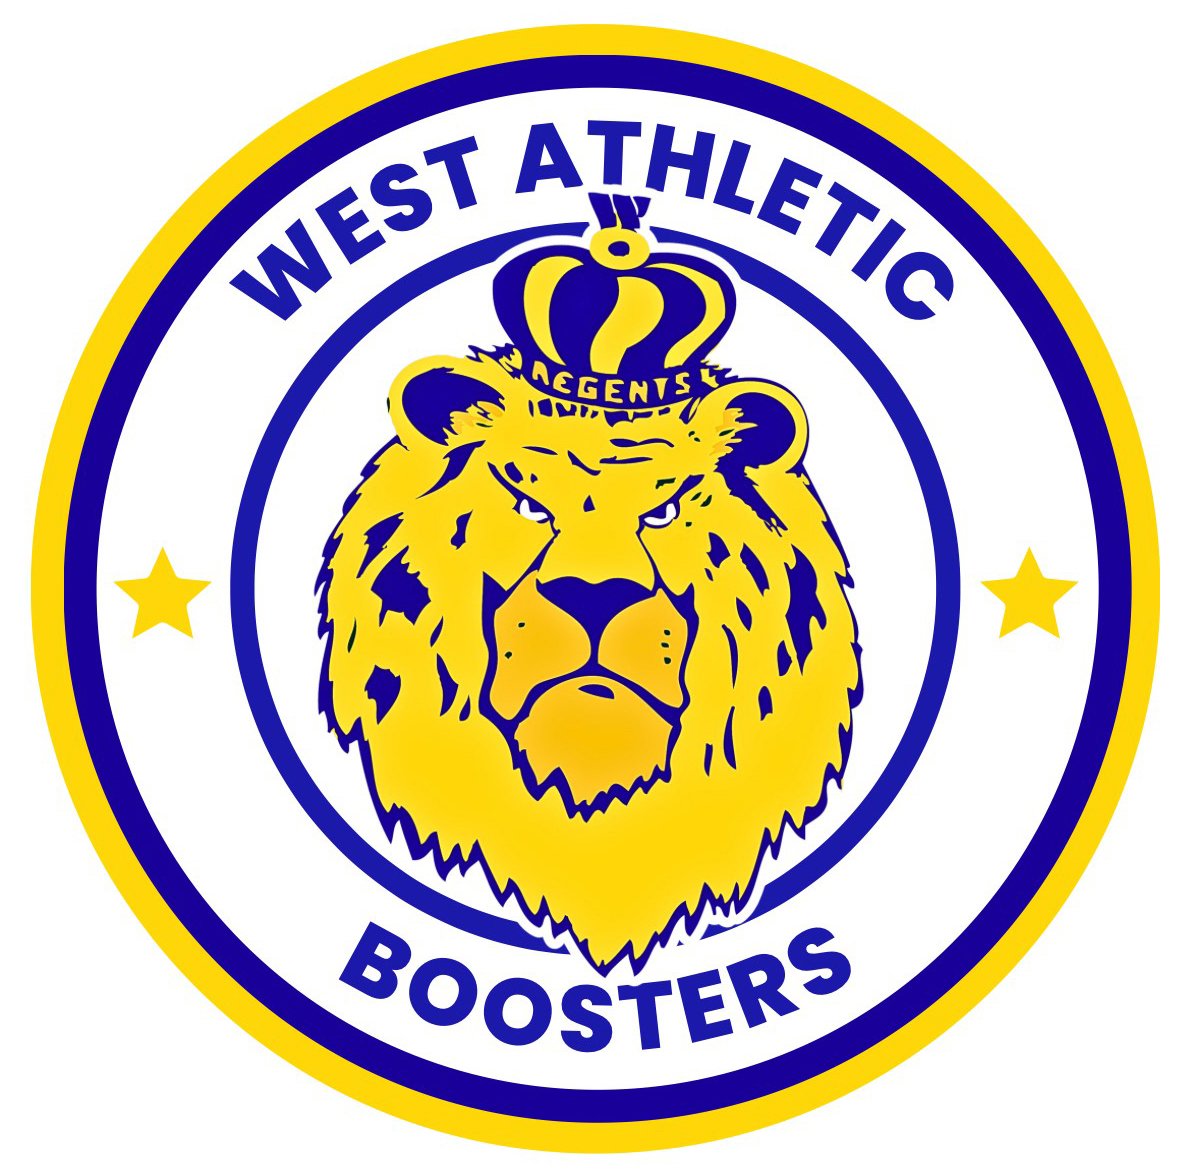 West Athletic Boosters